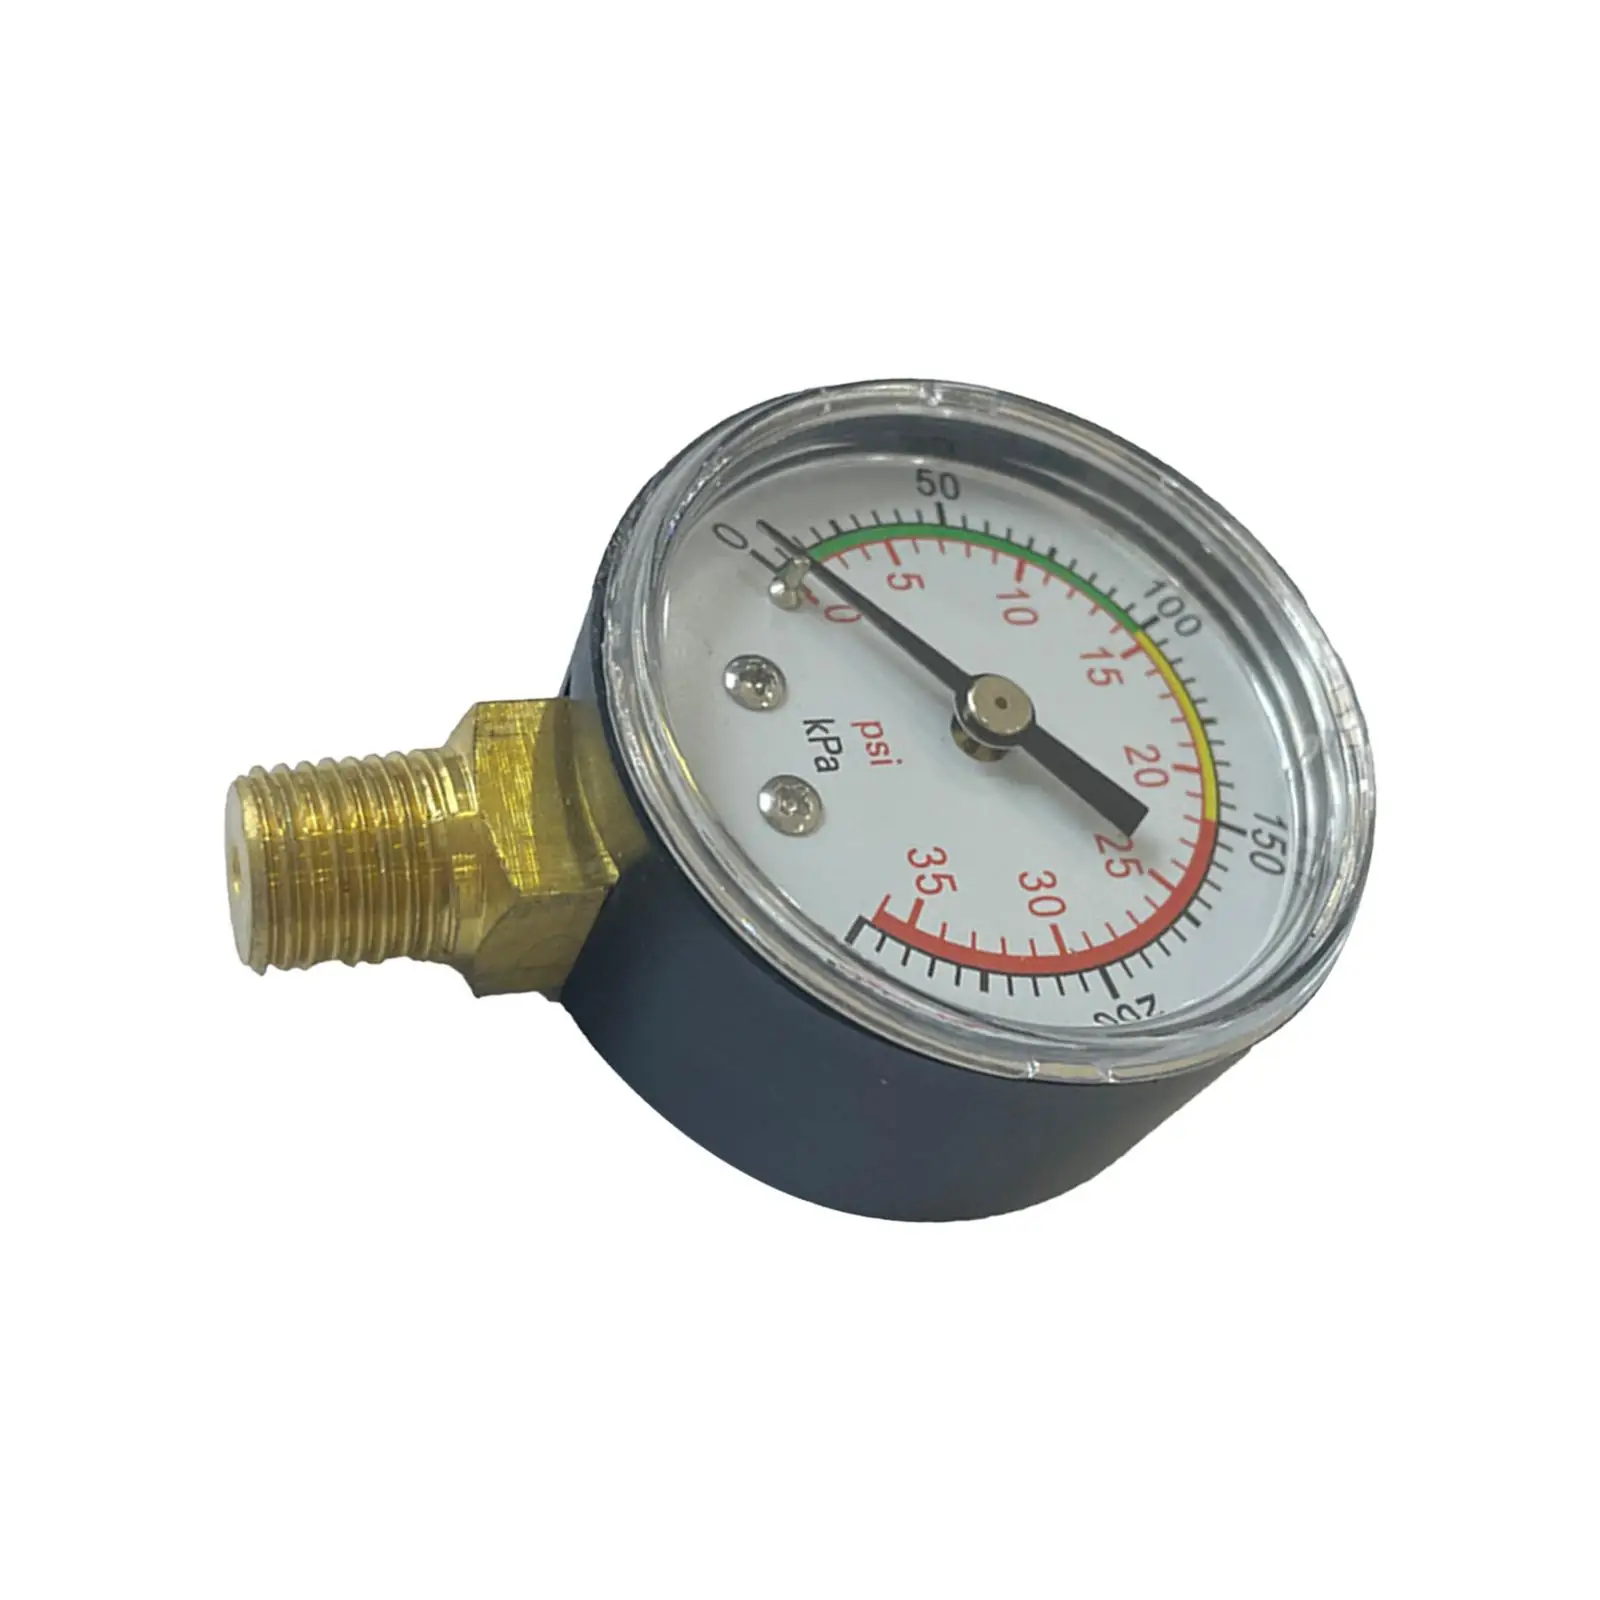 Pressure Gauge for Swimming Pool Accuracy Lightweight Dual Scale Dial Display Pool Sand Filter Pressure Gauge for Hot Tubs Accs